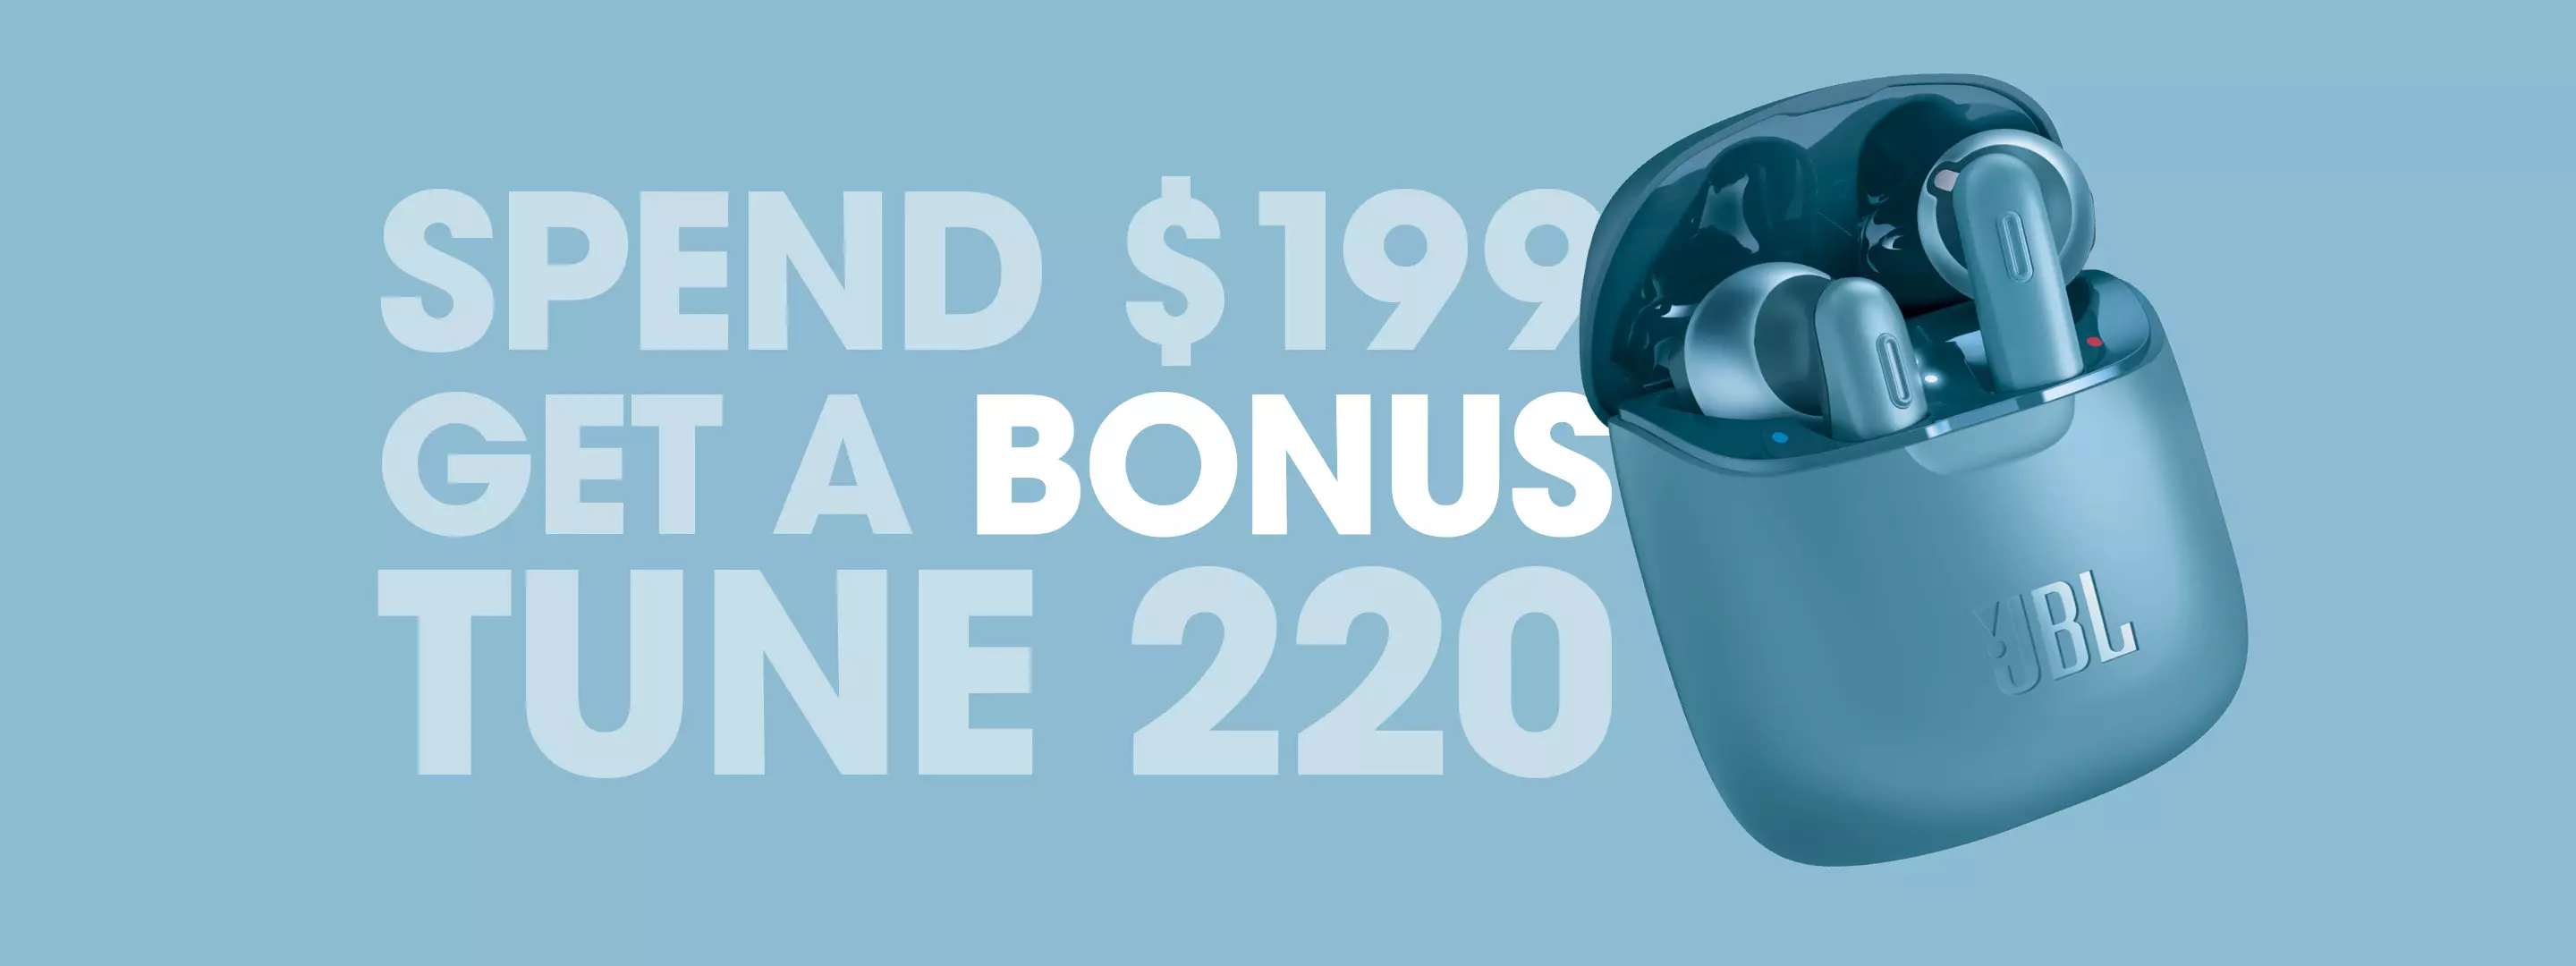 Get a Bonus Tune 220, Tune 205 on your purchase